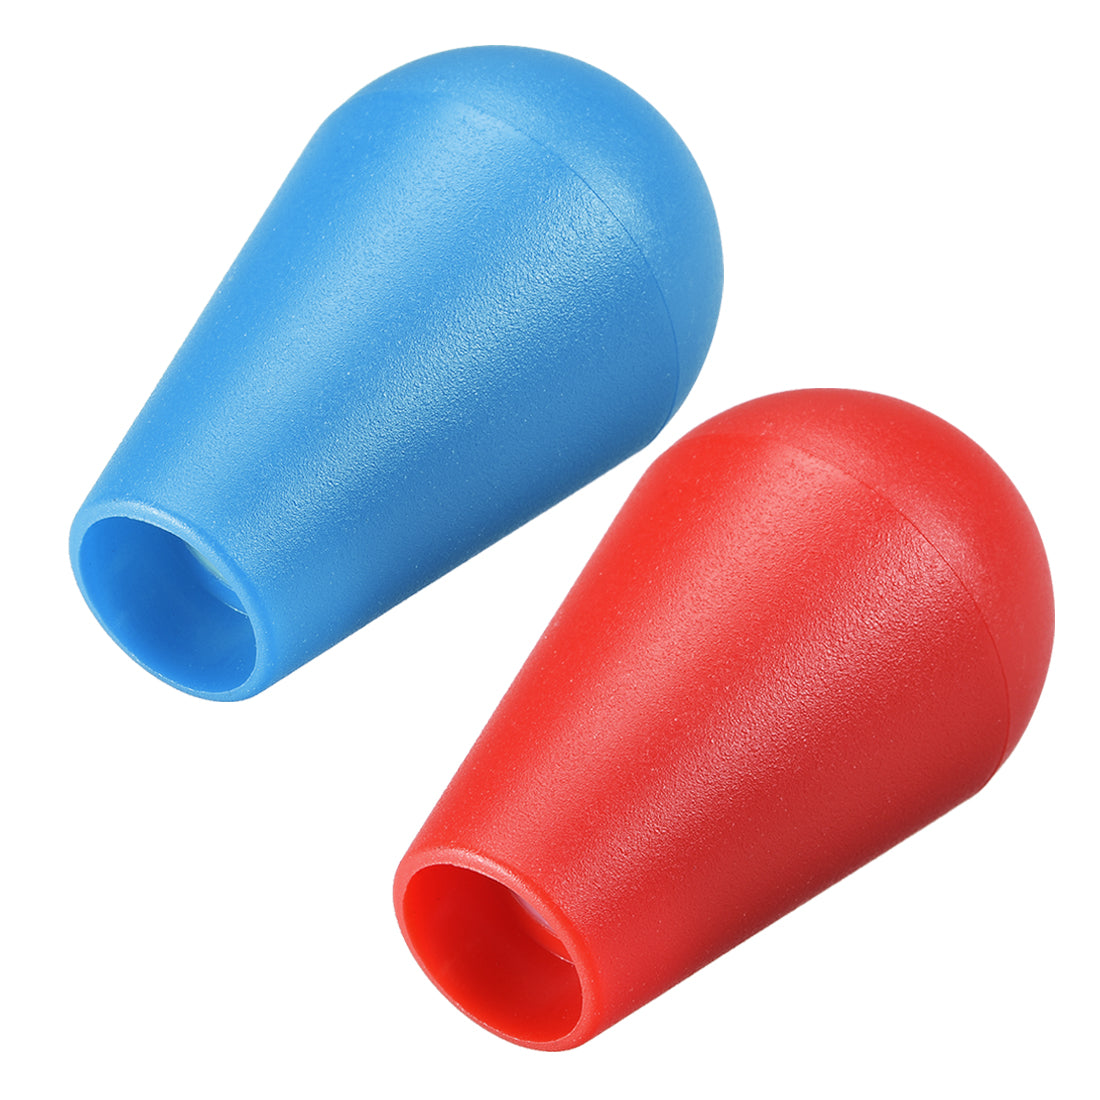 uxcell Uxcell Ellipse Oval Joystick Head Rocker Ball Top Handle American Type Arcade Game DIY Parts Replacement Red Blue 2Pcs